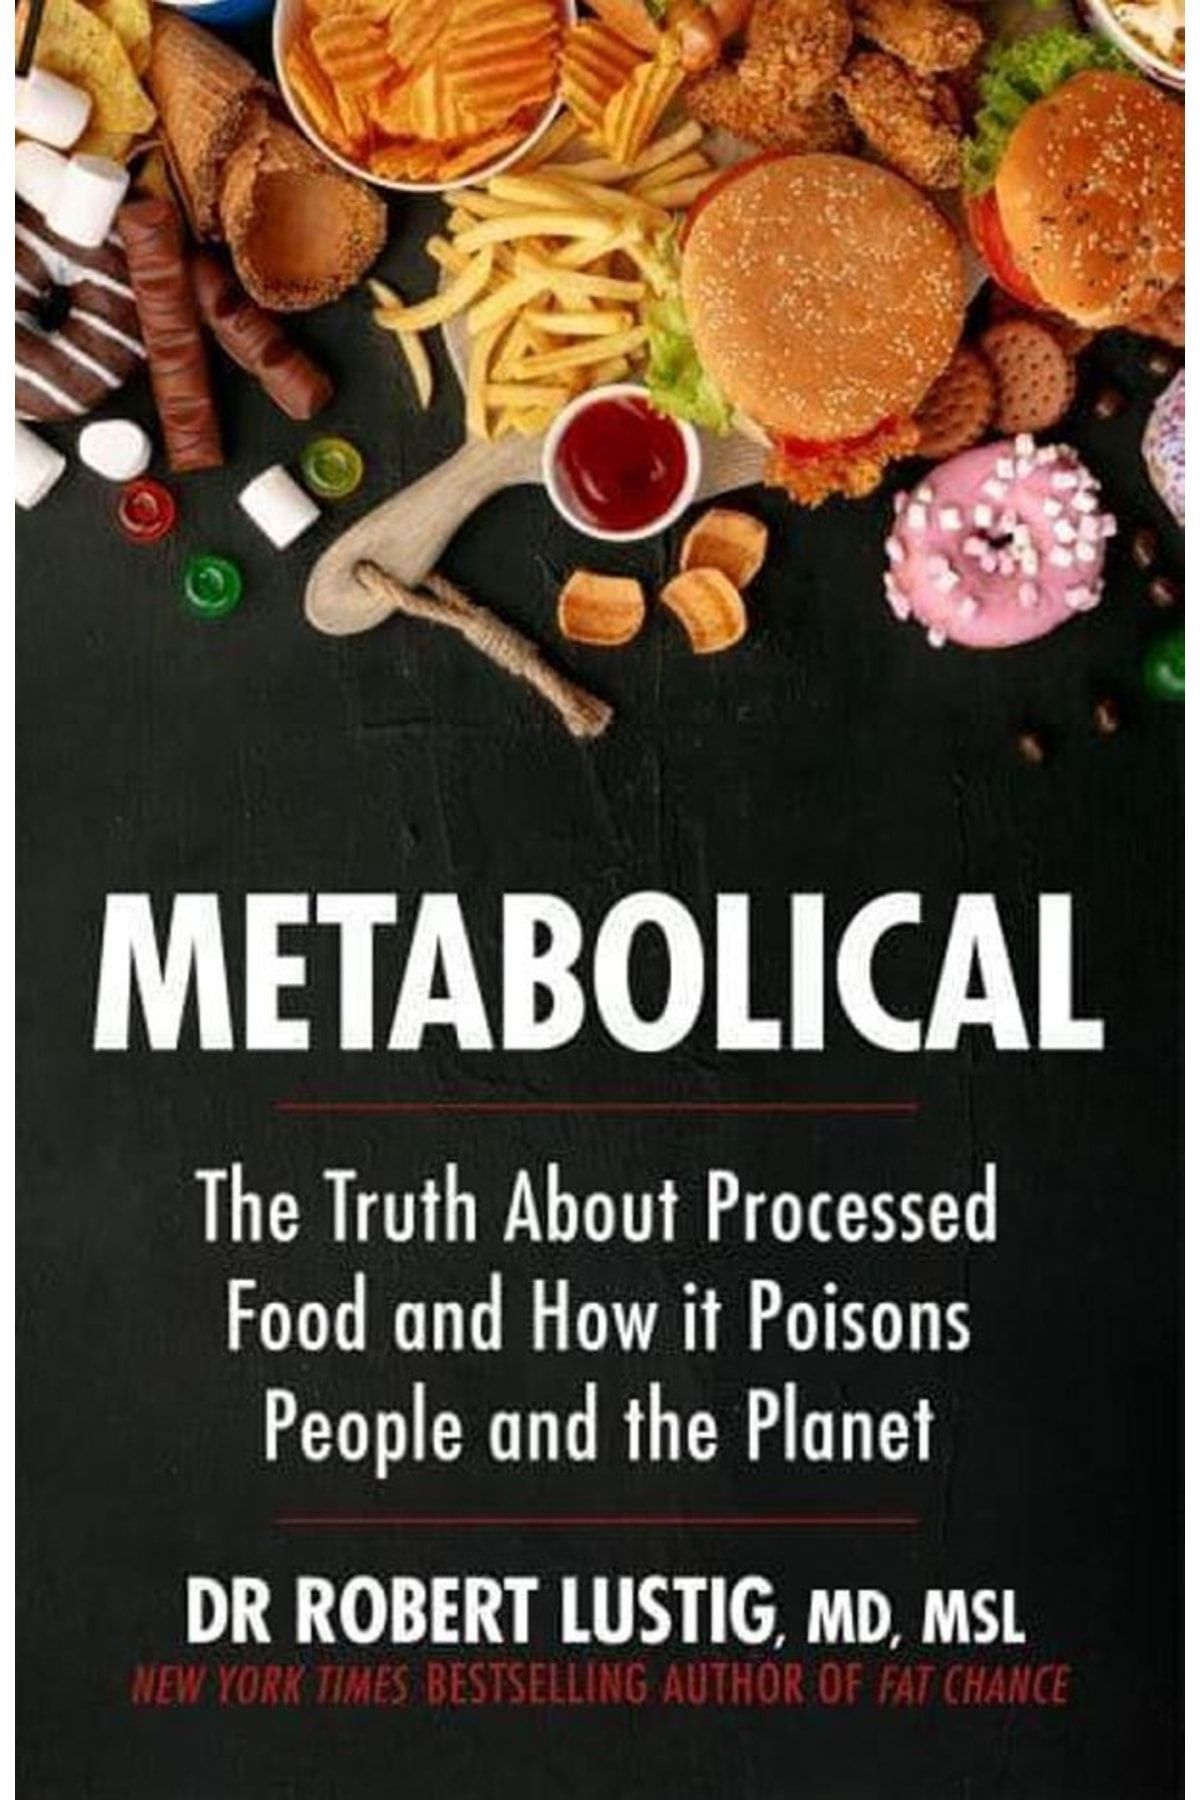 Yellow Kite Metabolical The Truth About Processed Food And How It Poisons People And The Planet